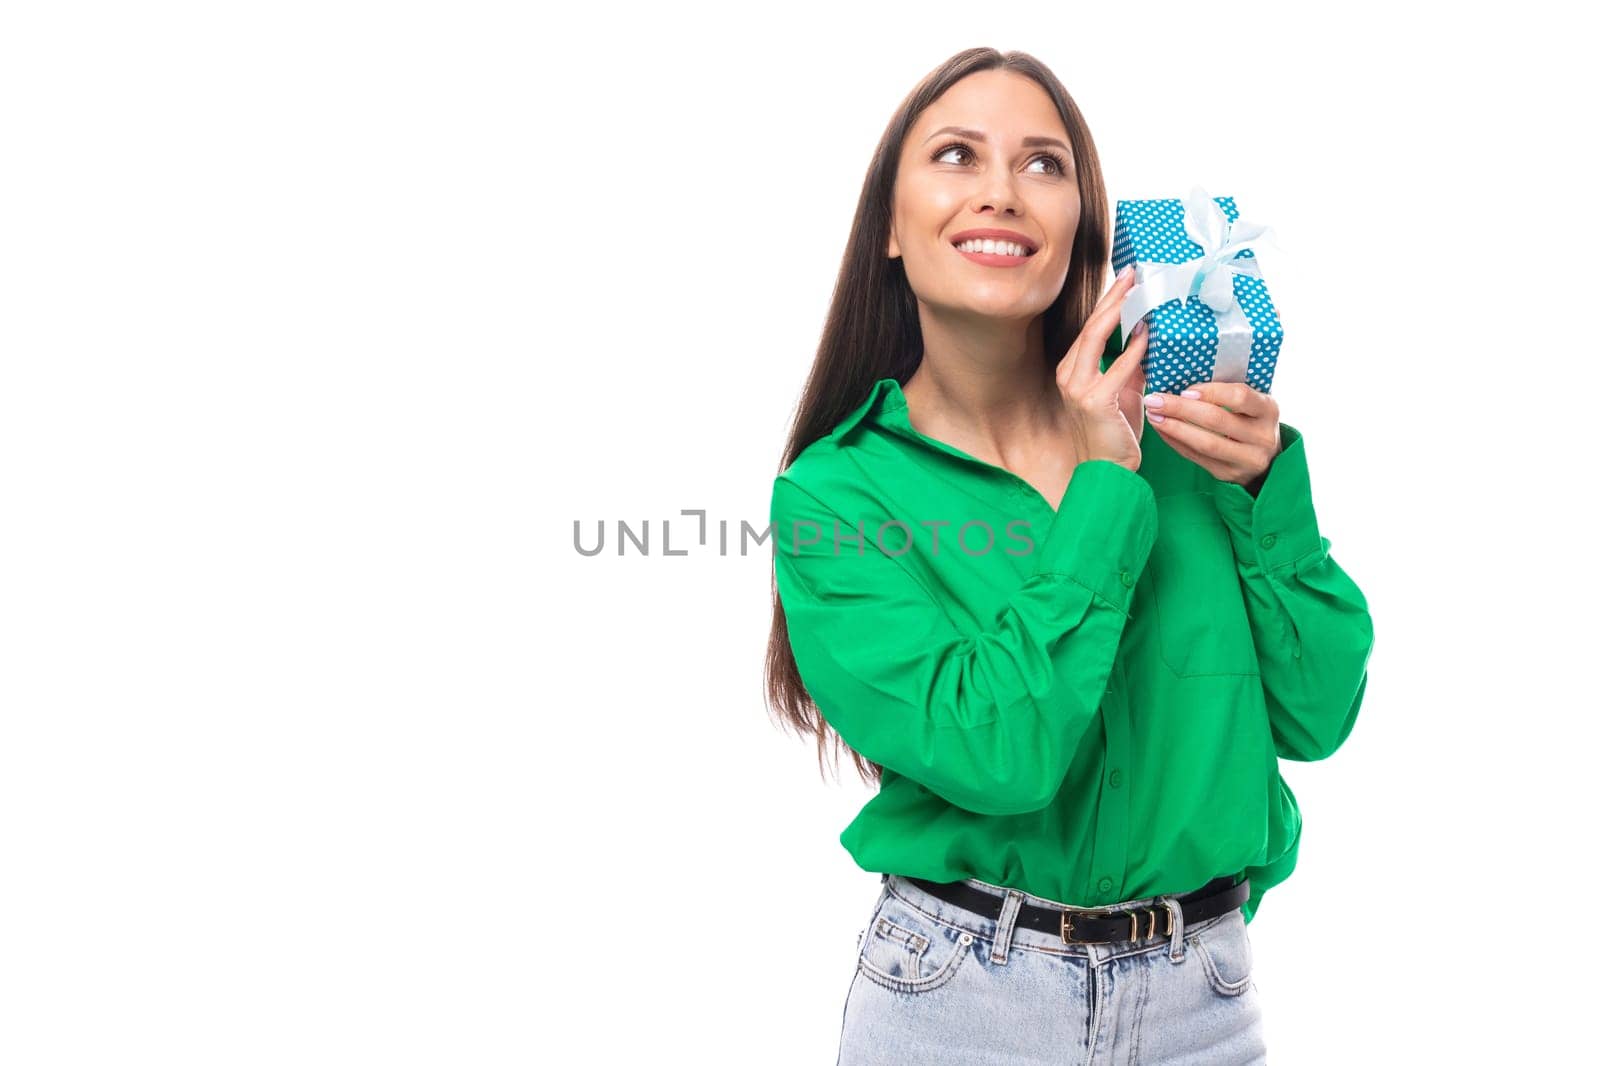 brown-eyed brunette young business lady in a green shirt holds a gift for the holiday by TRMK